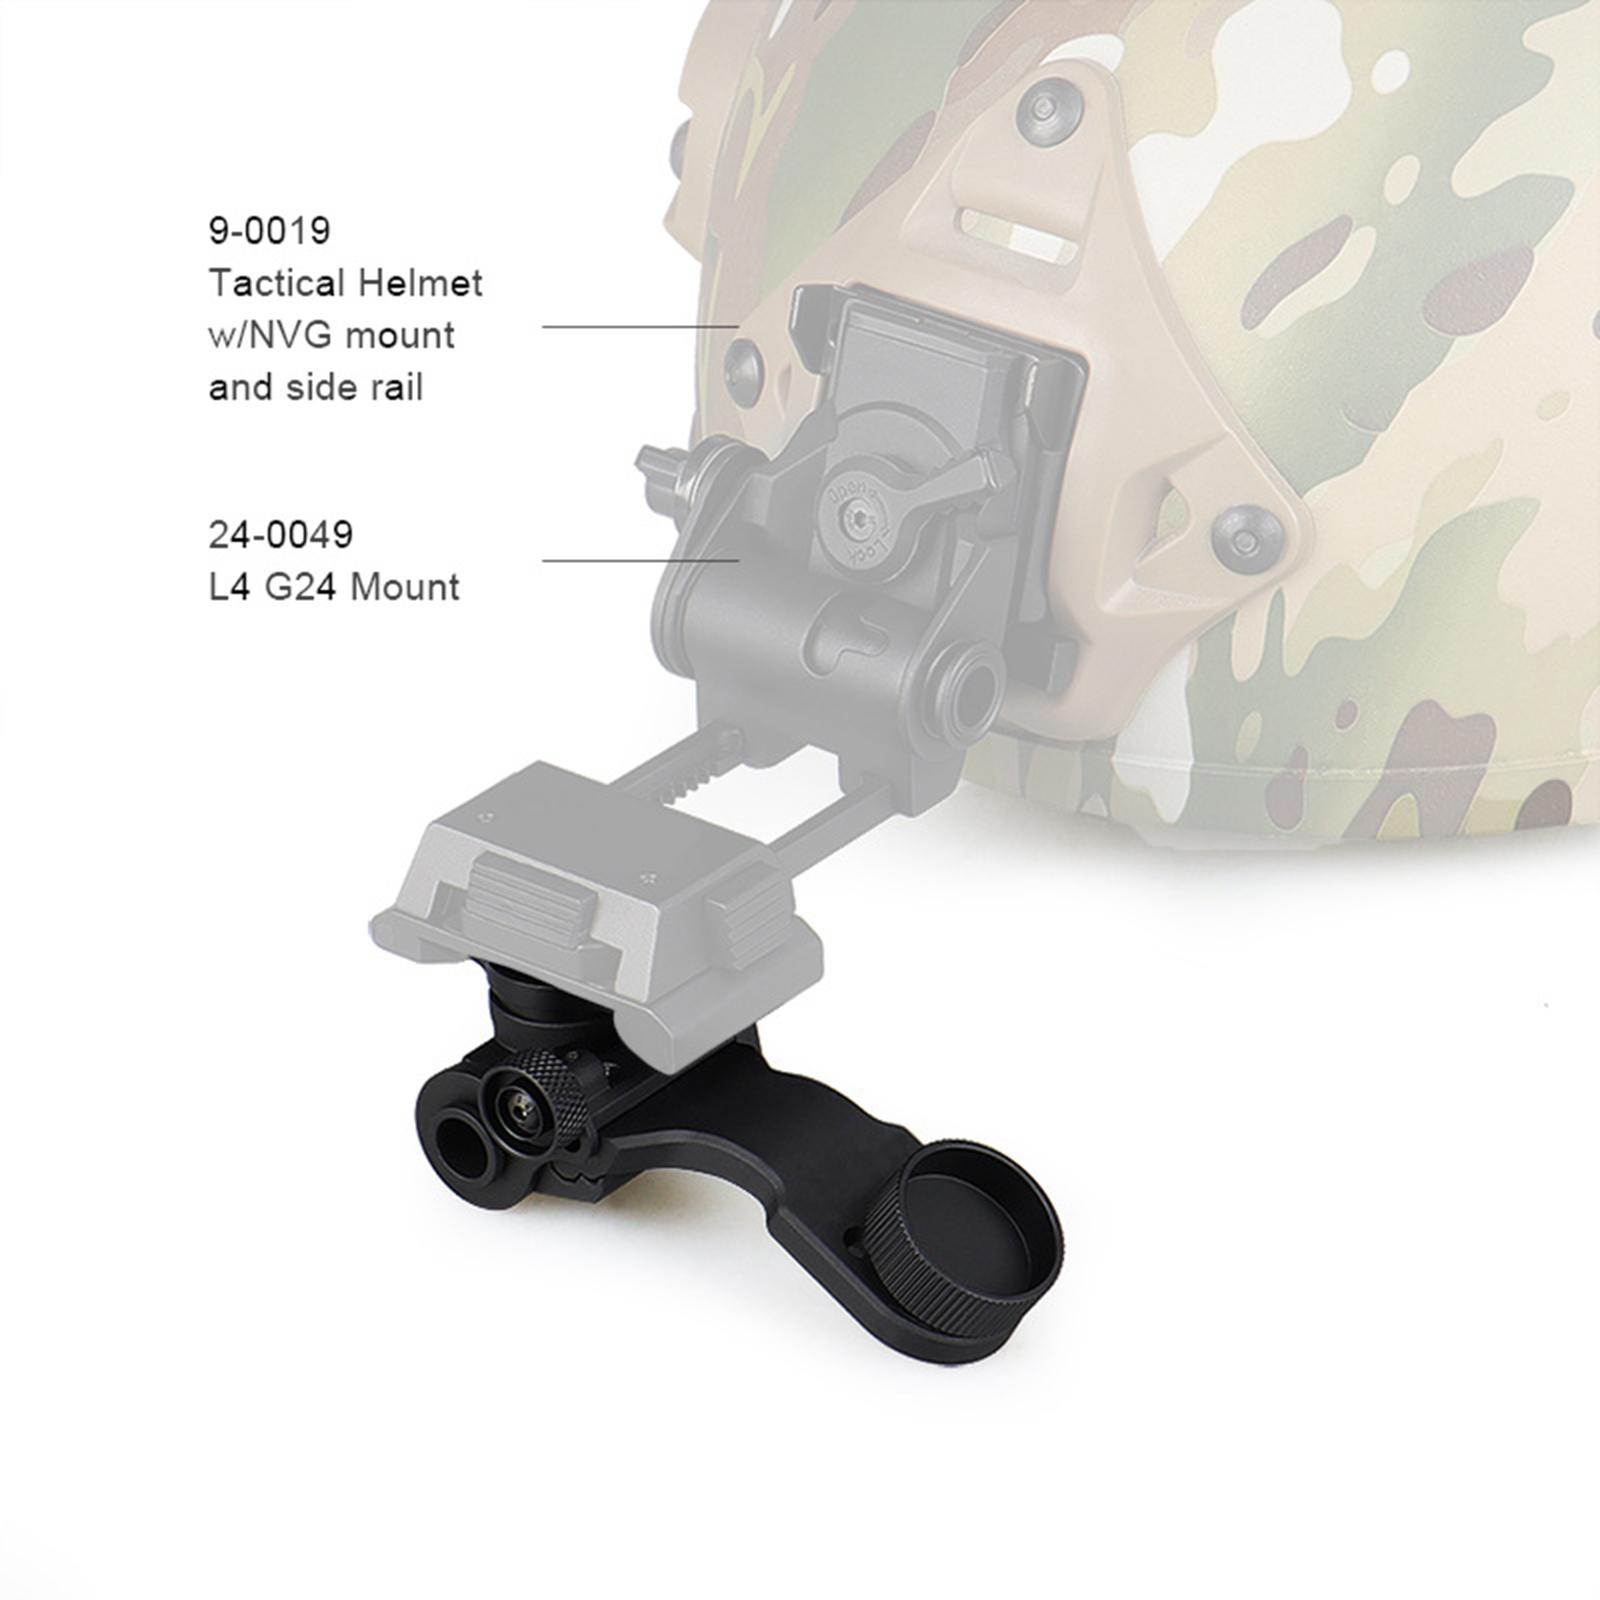 Hunting J Arm Adapter Nvg for Outdoor Sports Hunting Devices